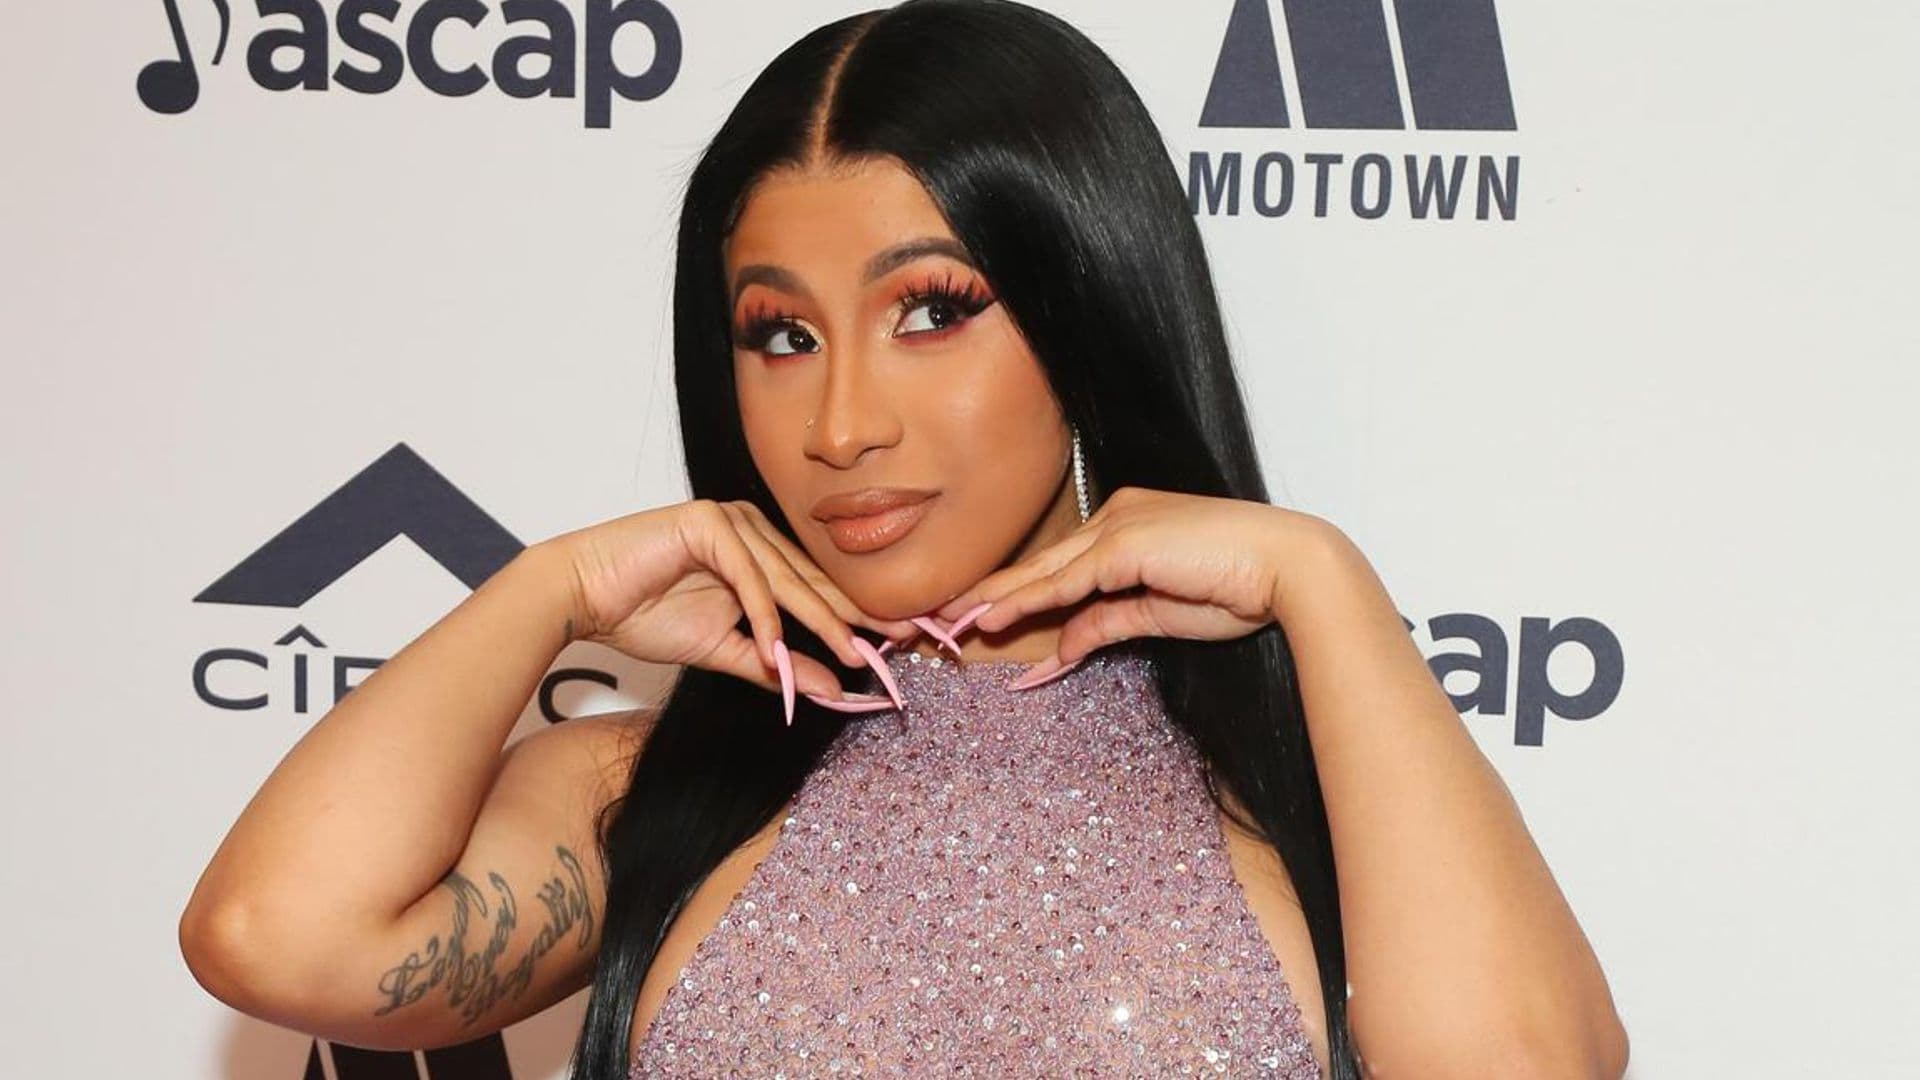 Cardi B upset with trolls over photoshopped photo of herself, “They are WOMEN!”